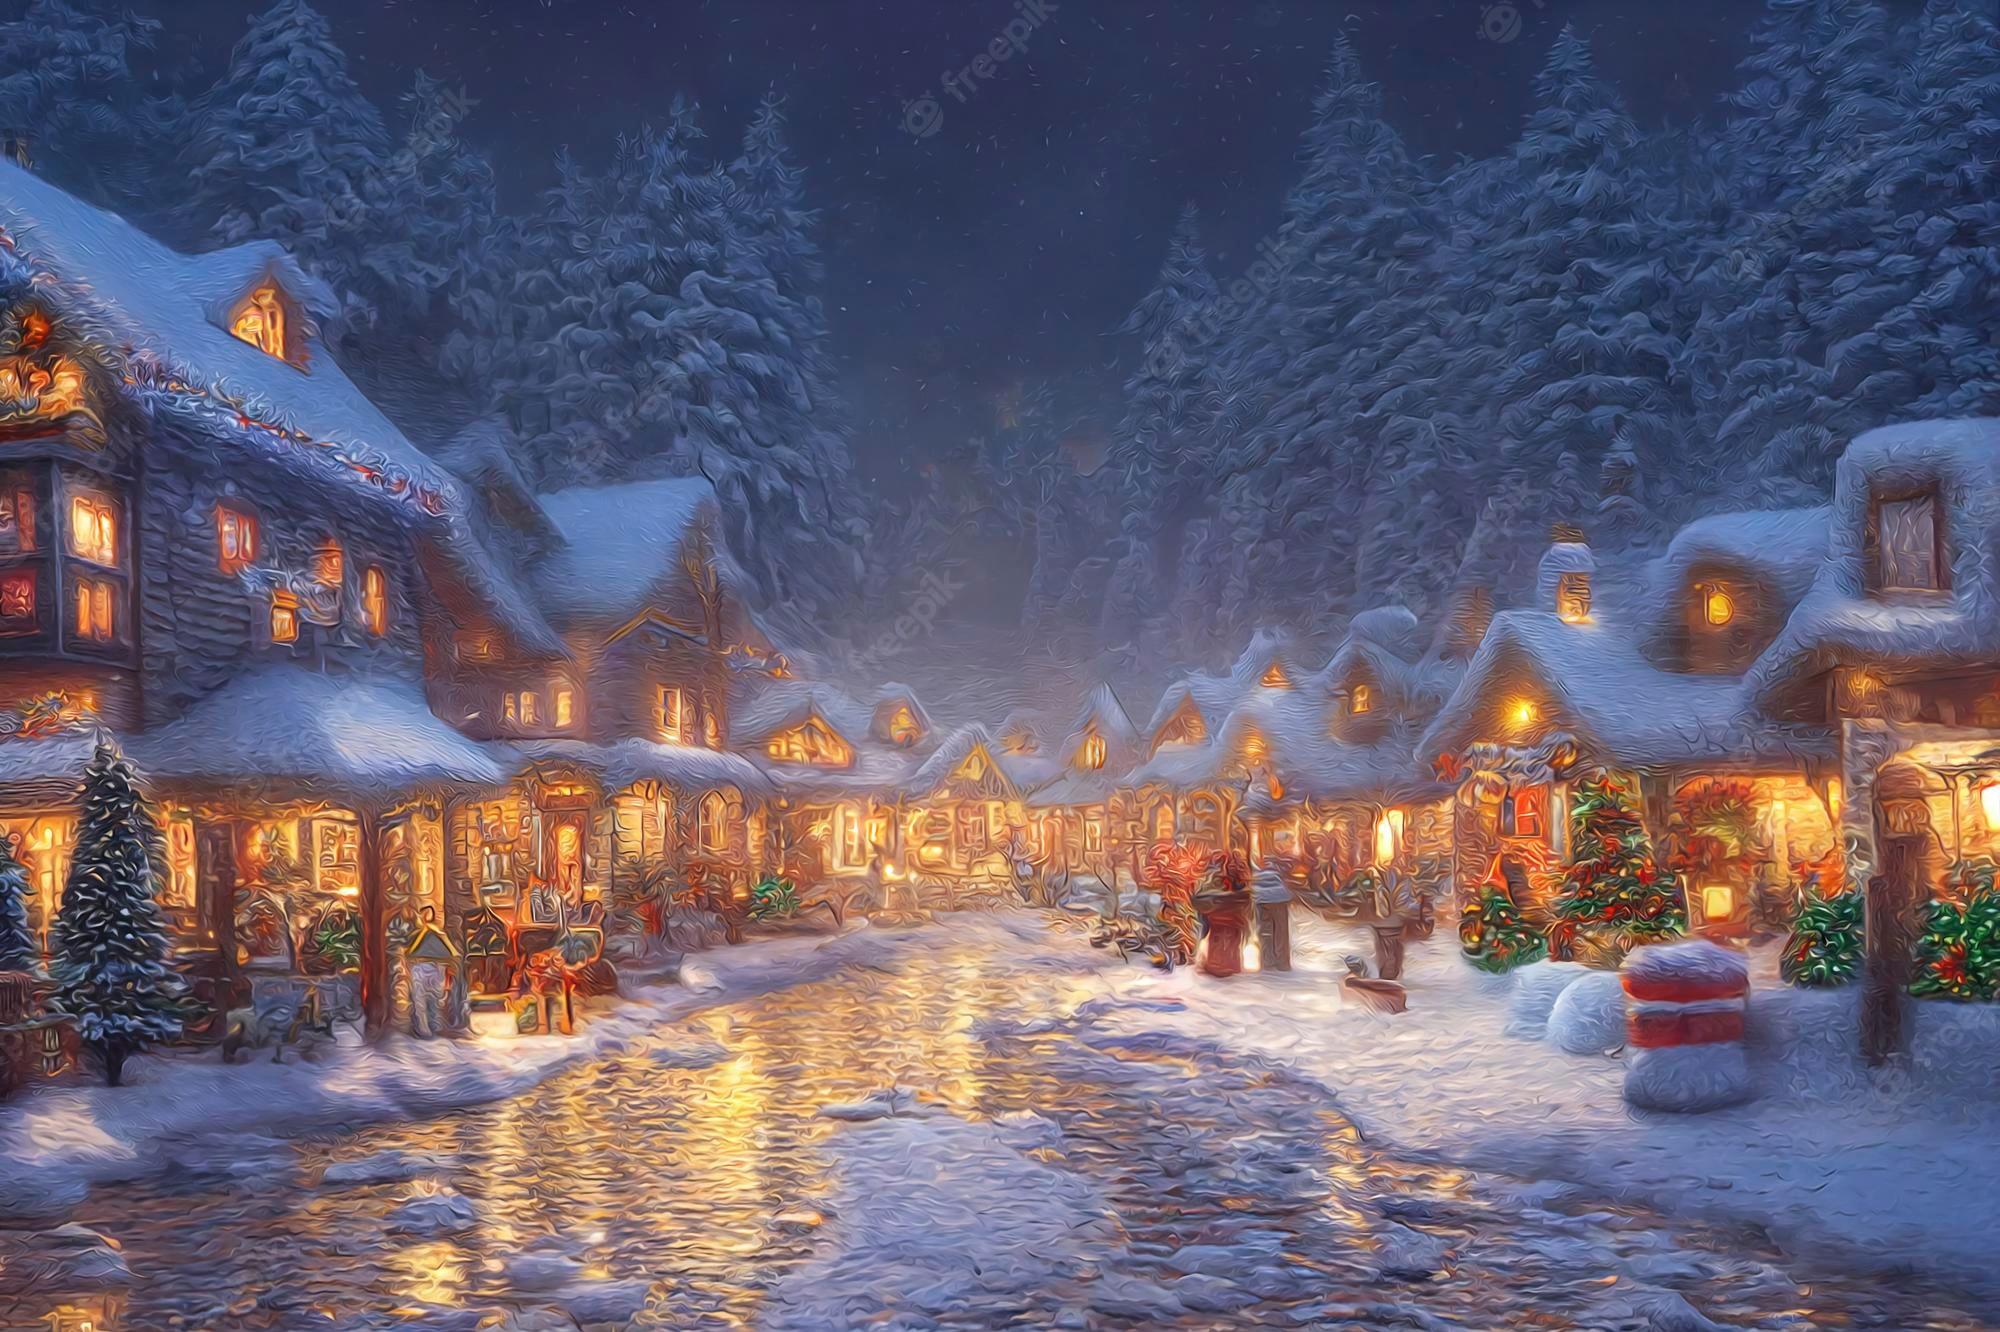 Premium Photo A Beautiful Christmas Village In The Mountains